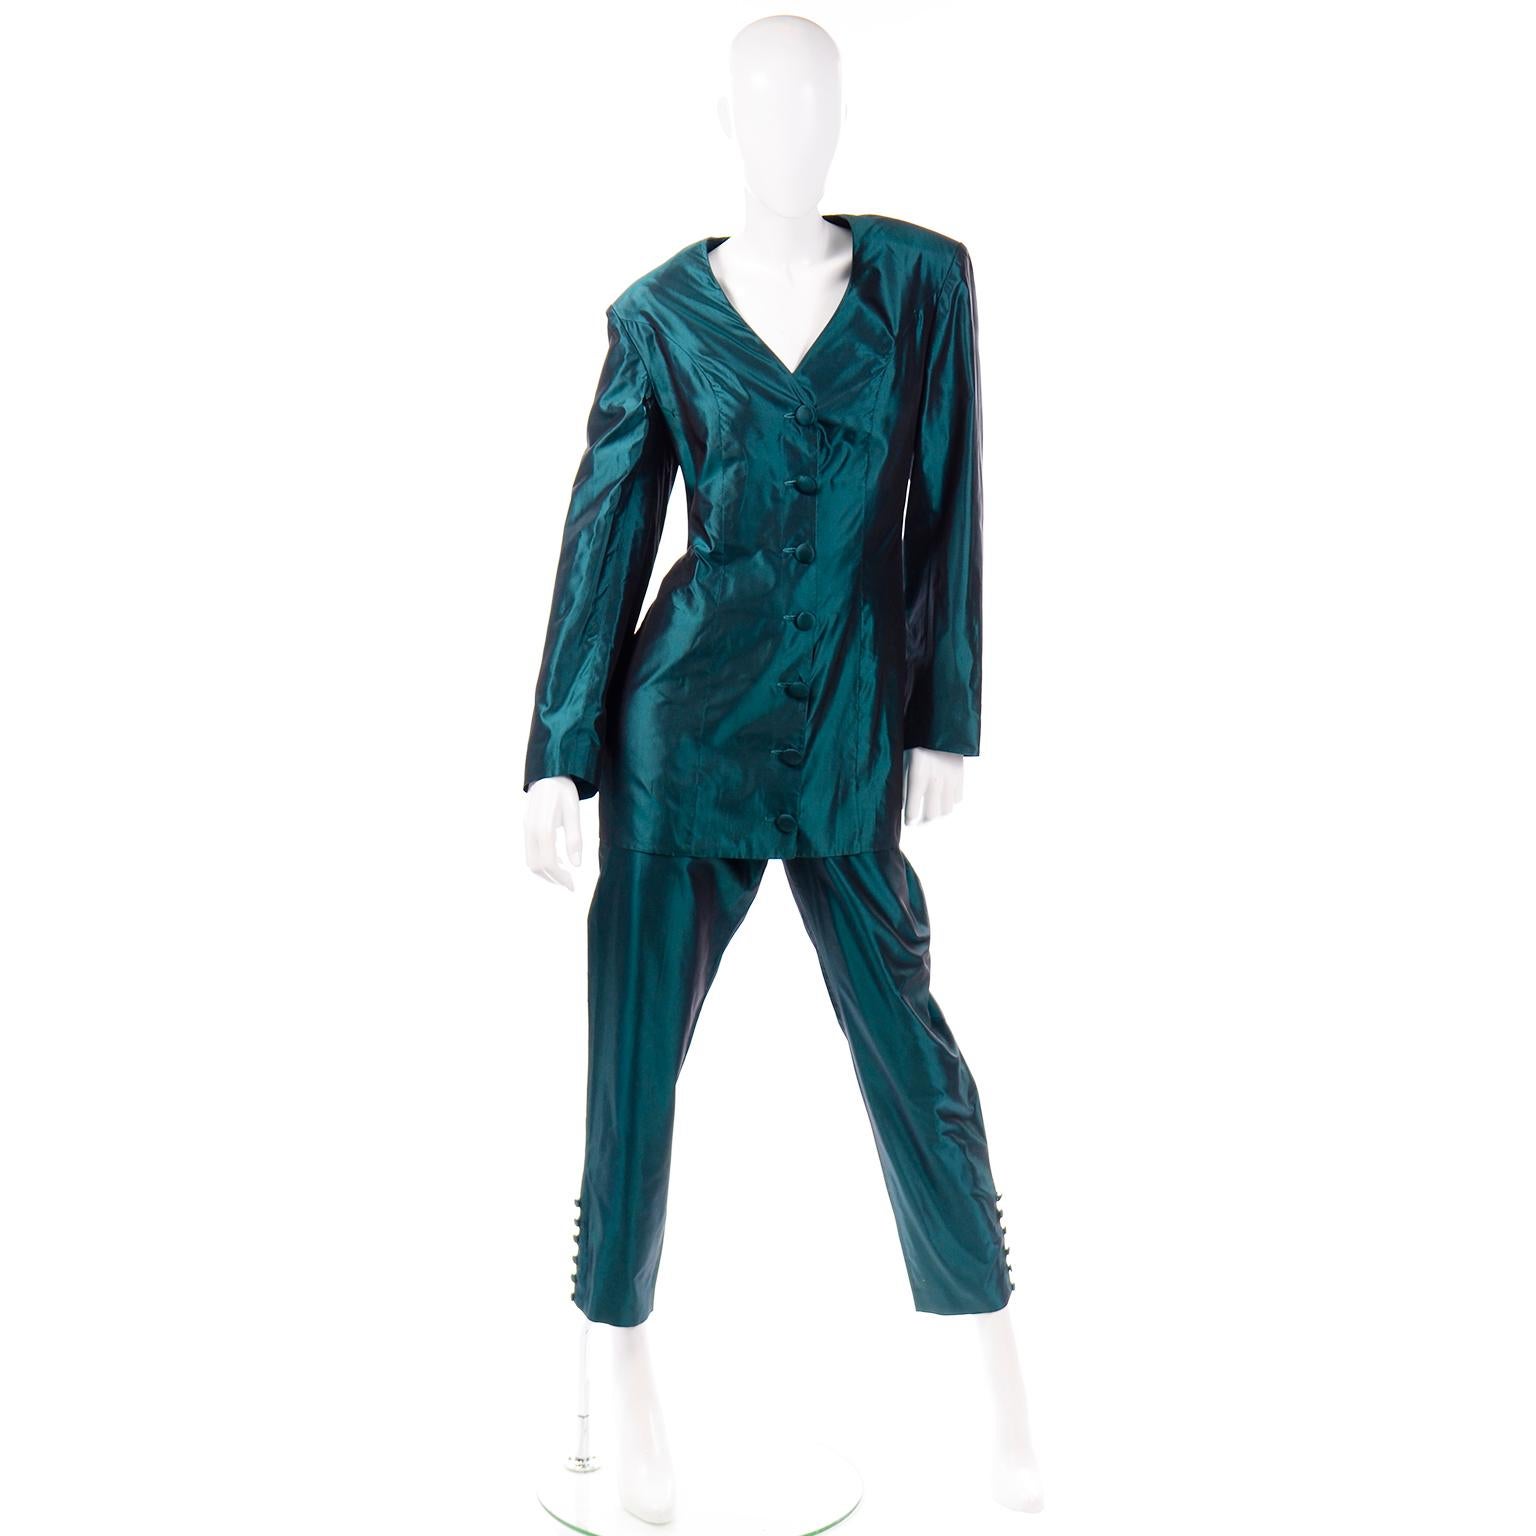 This vintage 2 piece evening pantsuit is in a luxurious green silk taffeta. This suit has a long line jacket, with a deep v-neck, and covered buttons down the center front opening. The waist of the blazer has darts, which help accentuate and shape